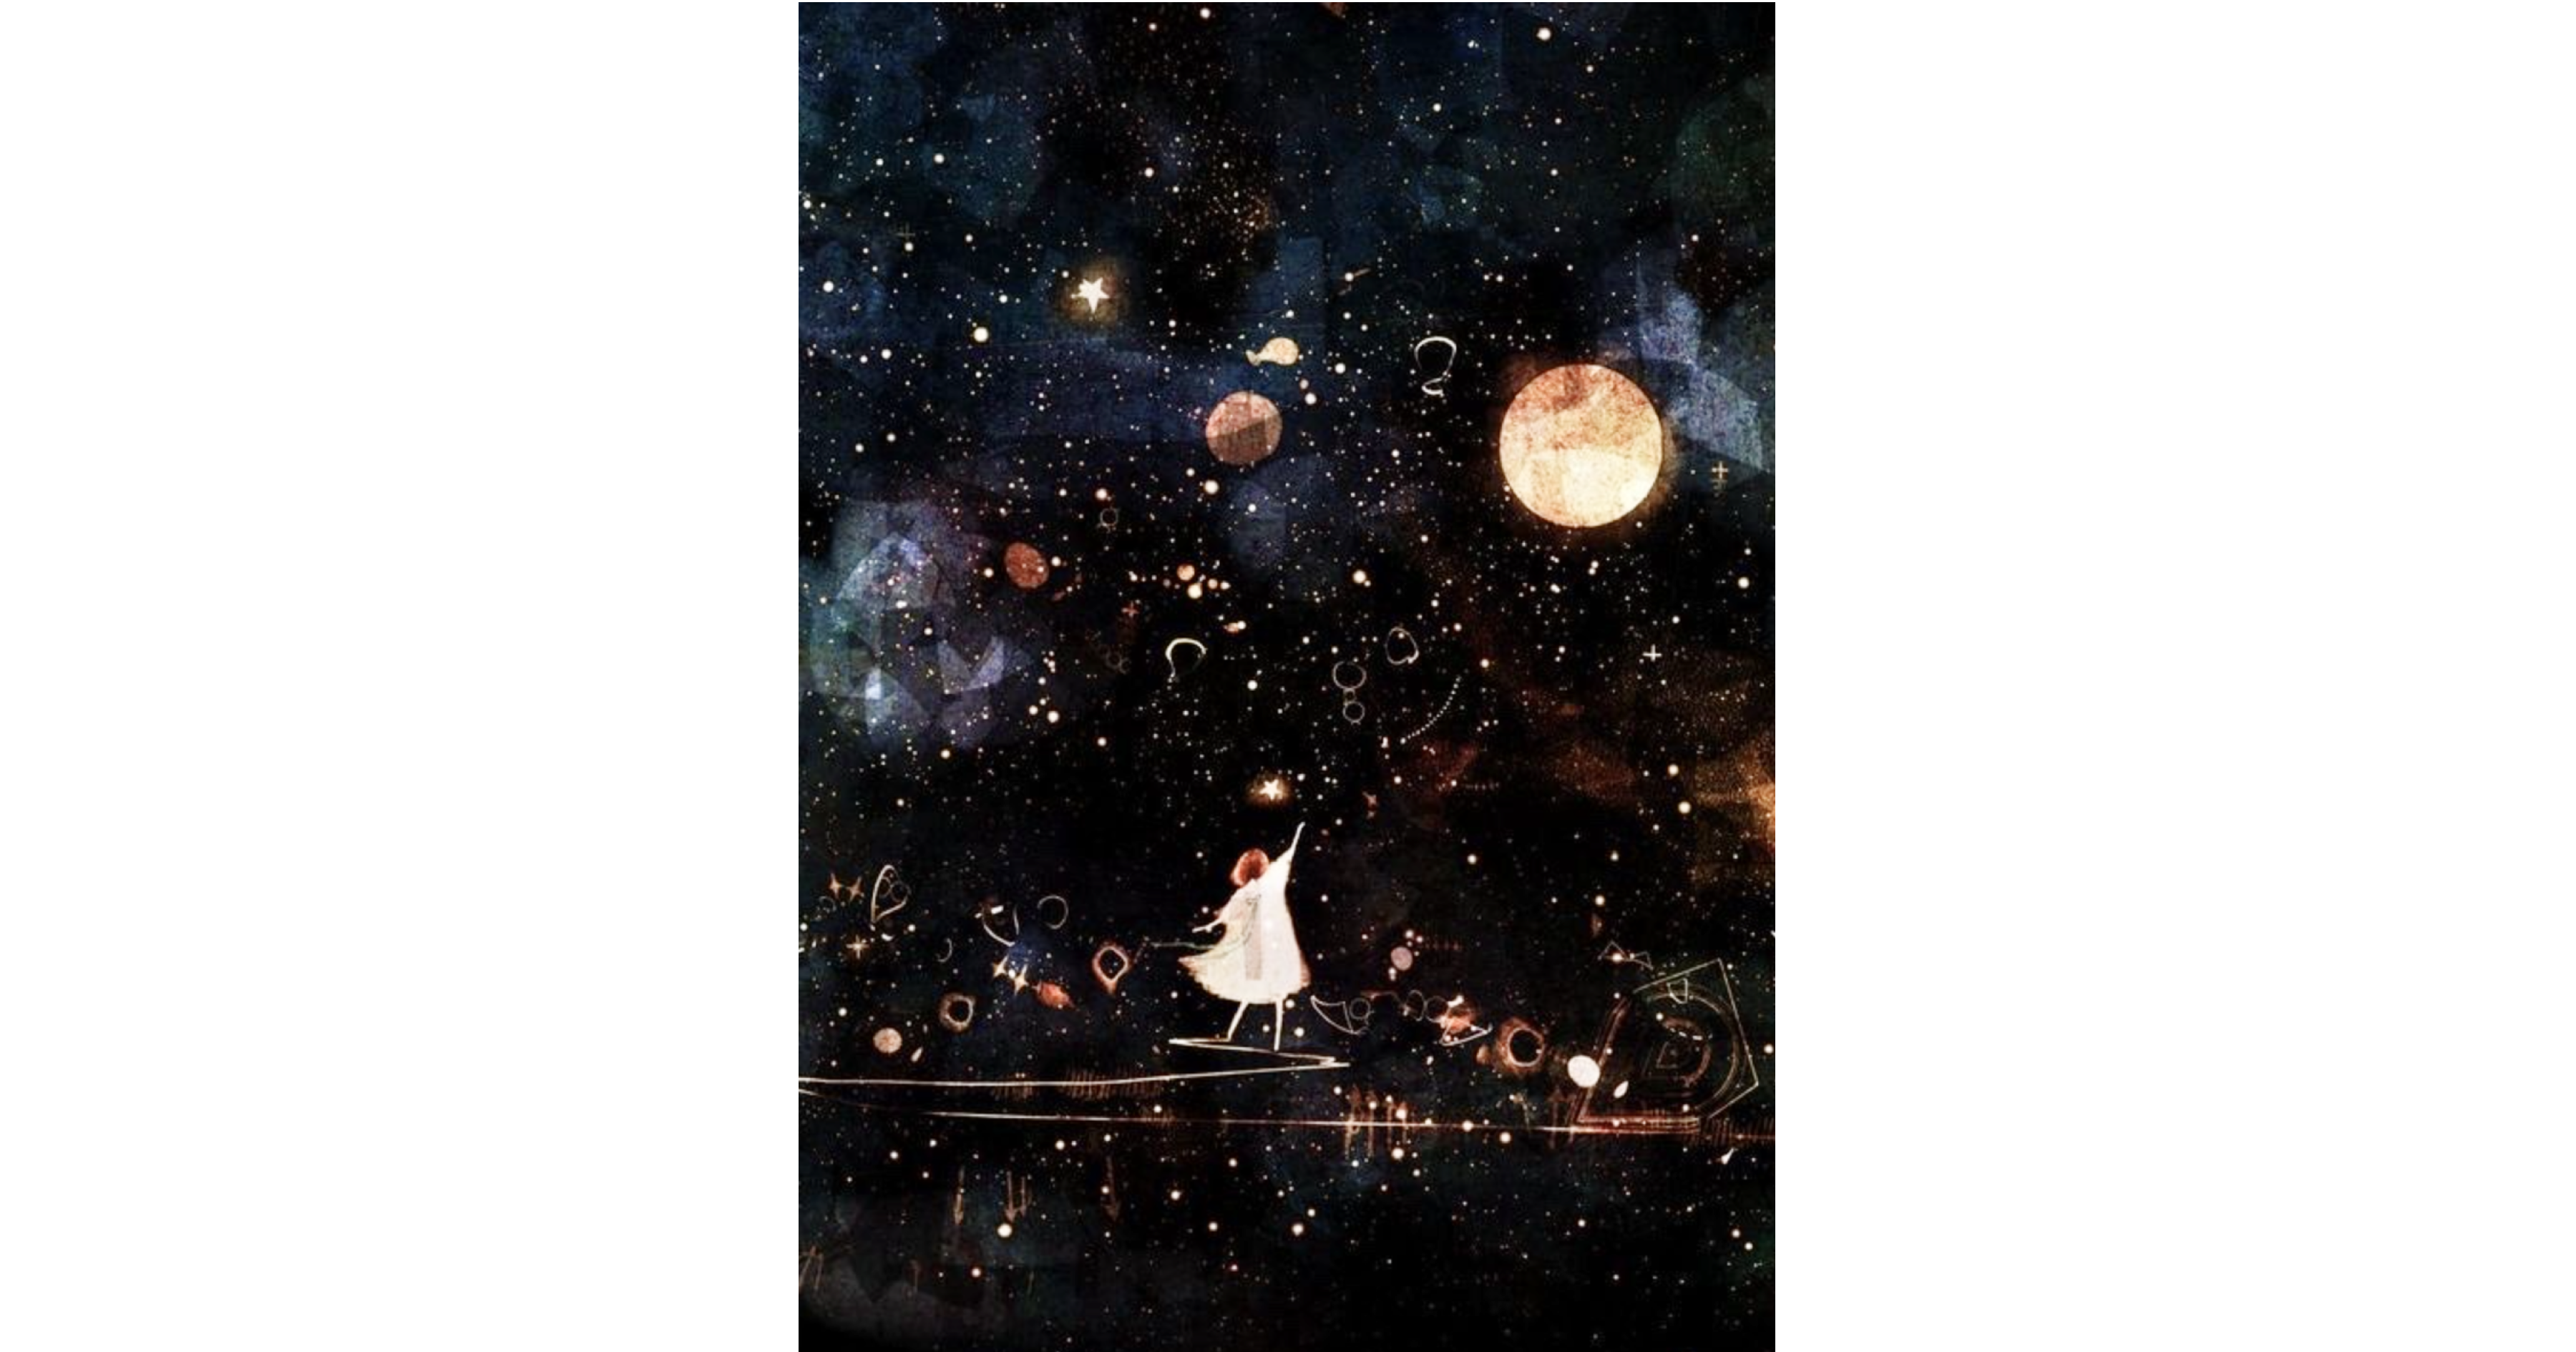 Girl in outer space surrounded by stars, reaching towards them